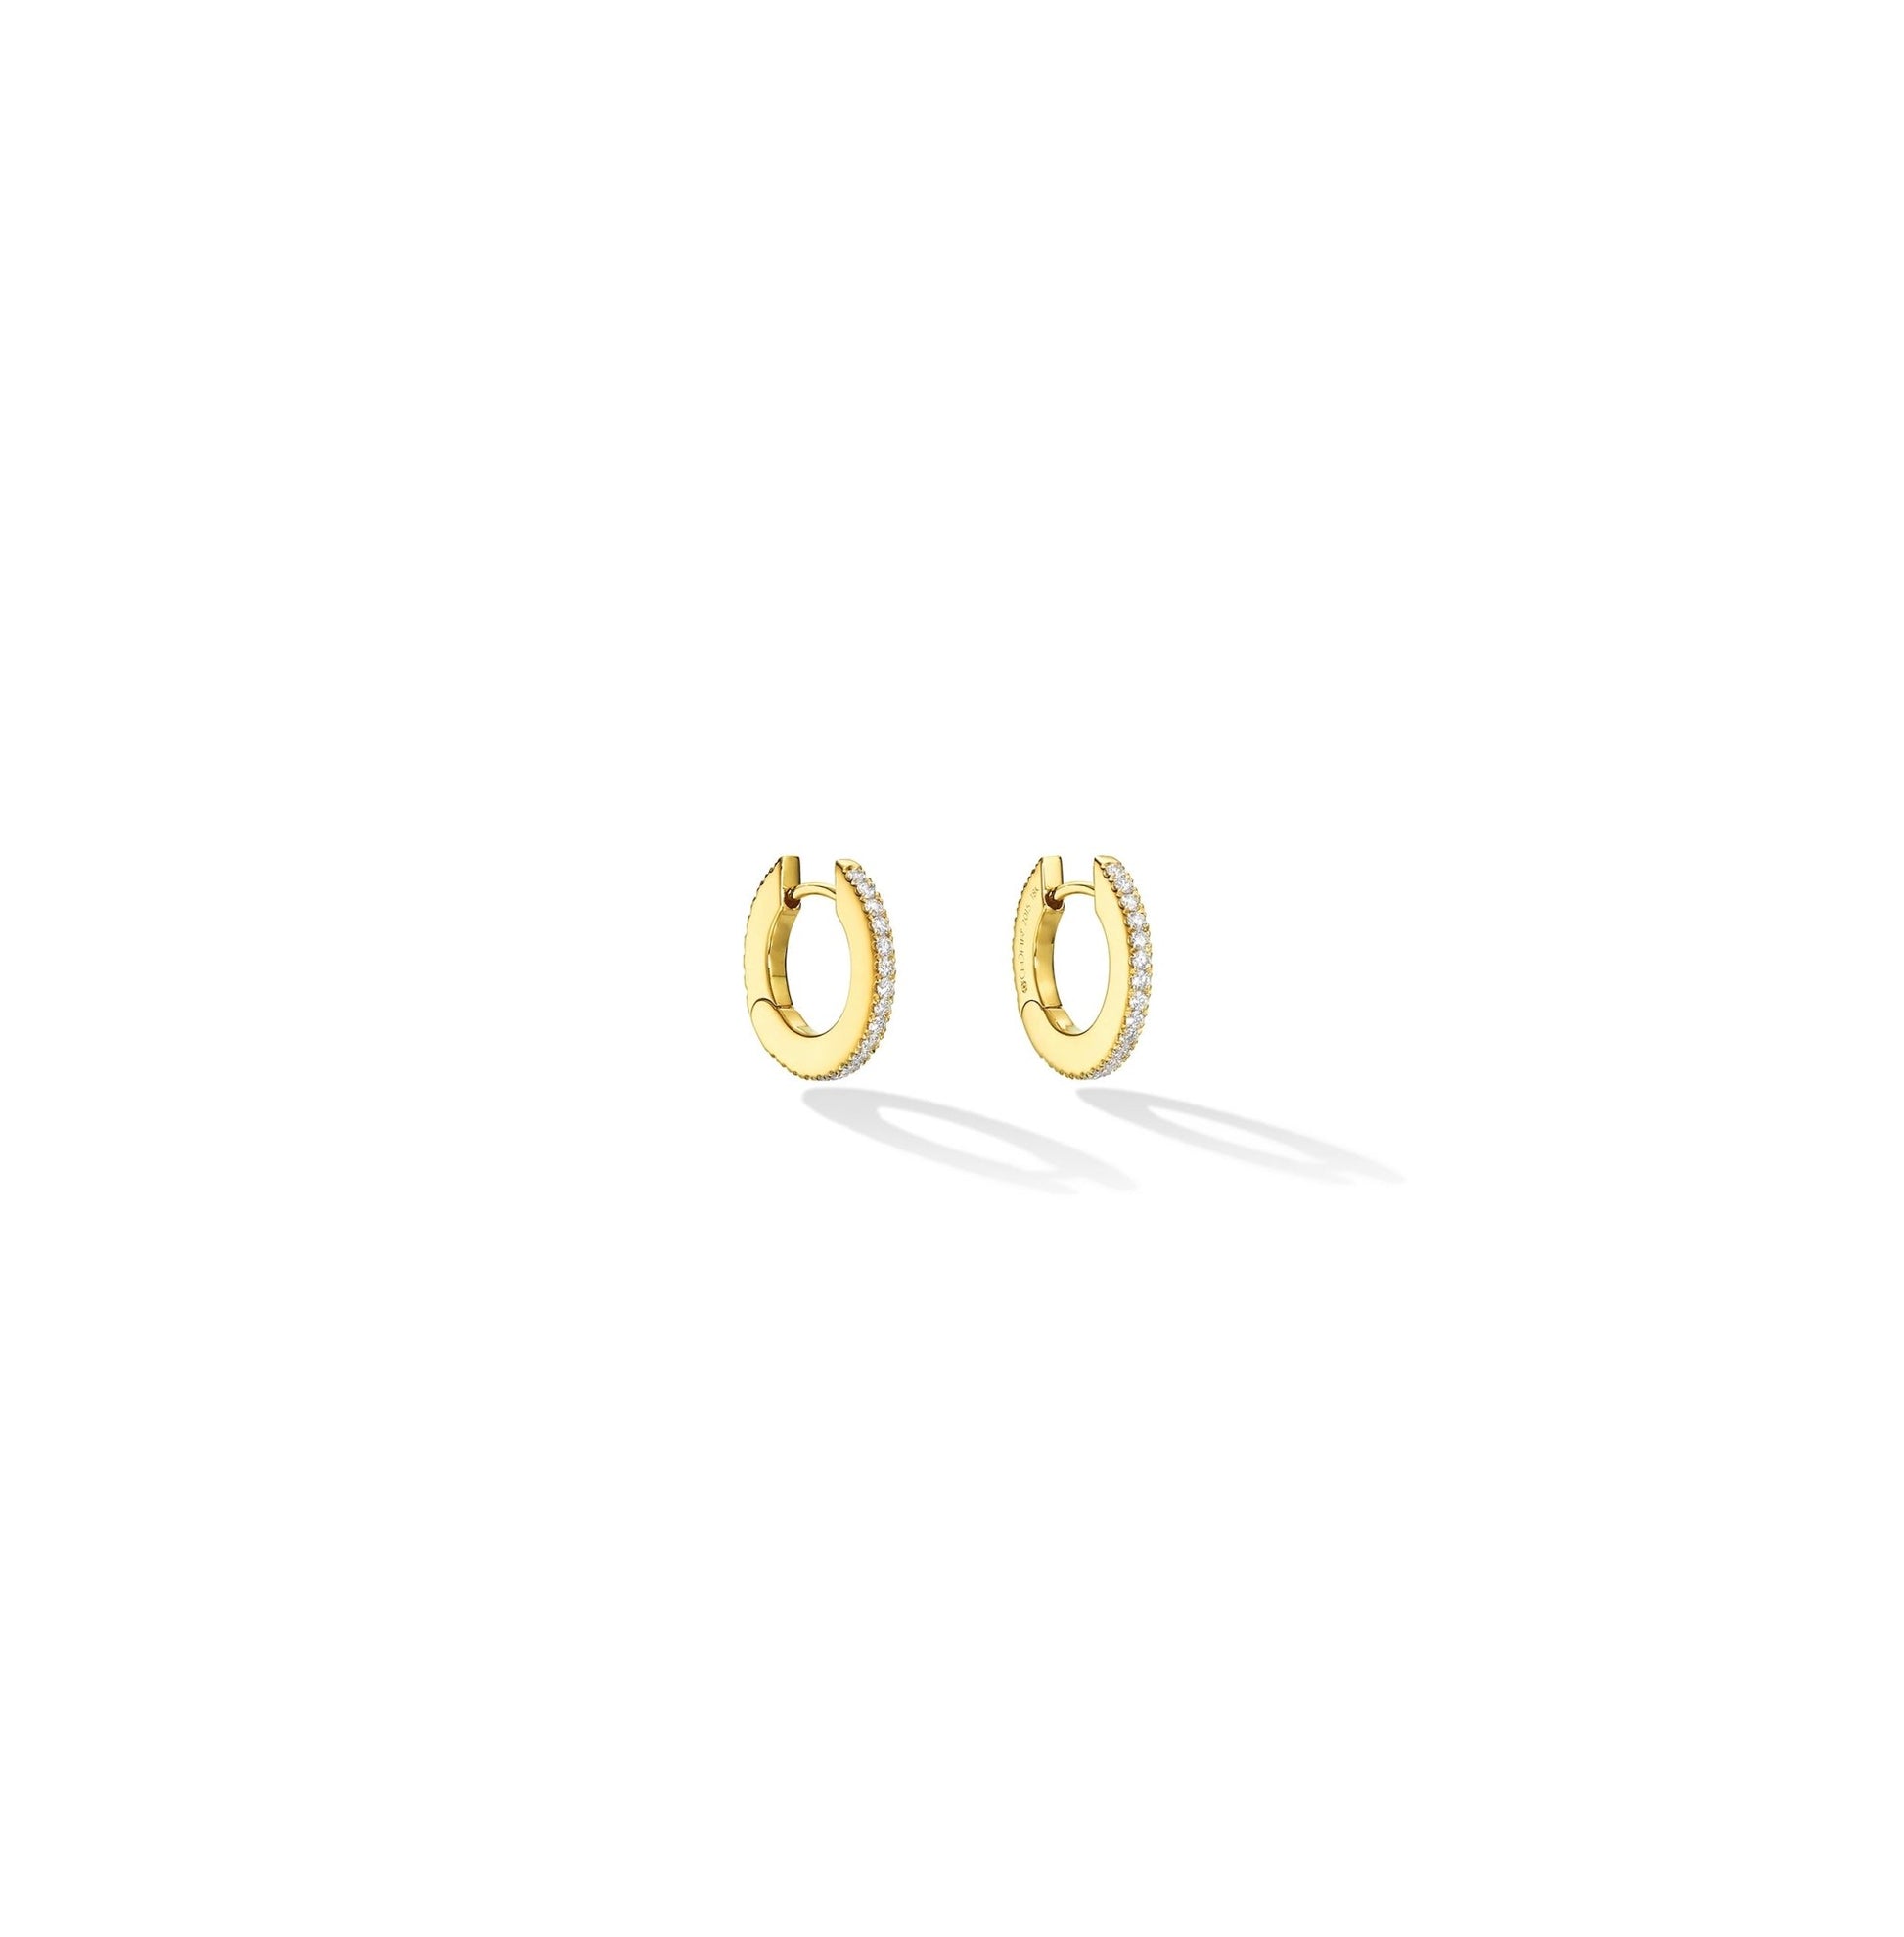 Small Yellow Gold Solo Hoop Earrings with White Diamonds - CADAR